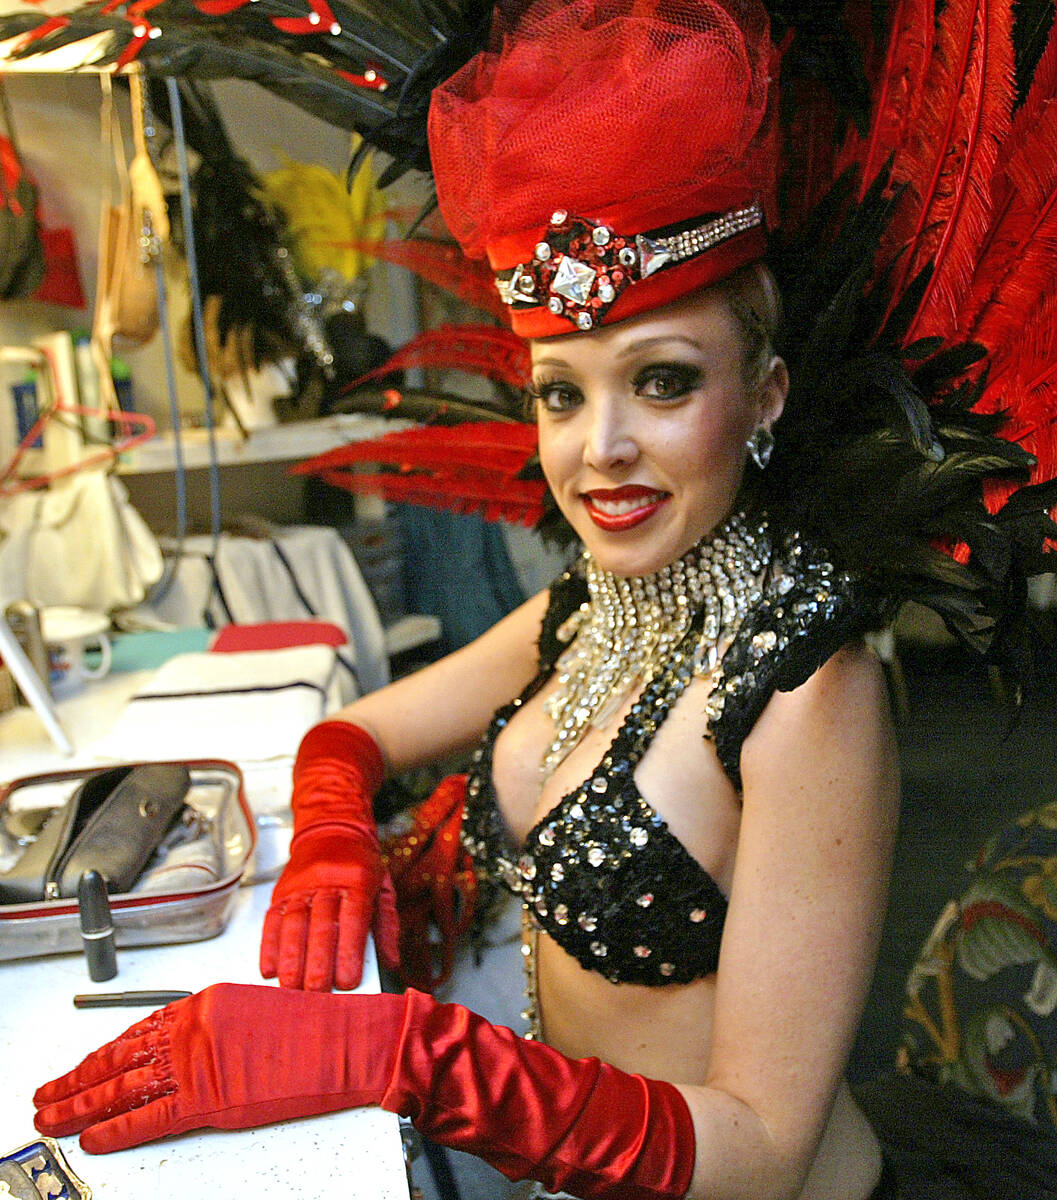 RJ FILE*** JANE KALINOWSKY/REVIEW-JOURNAL Kim Denmark, a dancer with Folies Bergere at the Trop ...